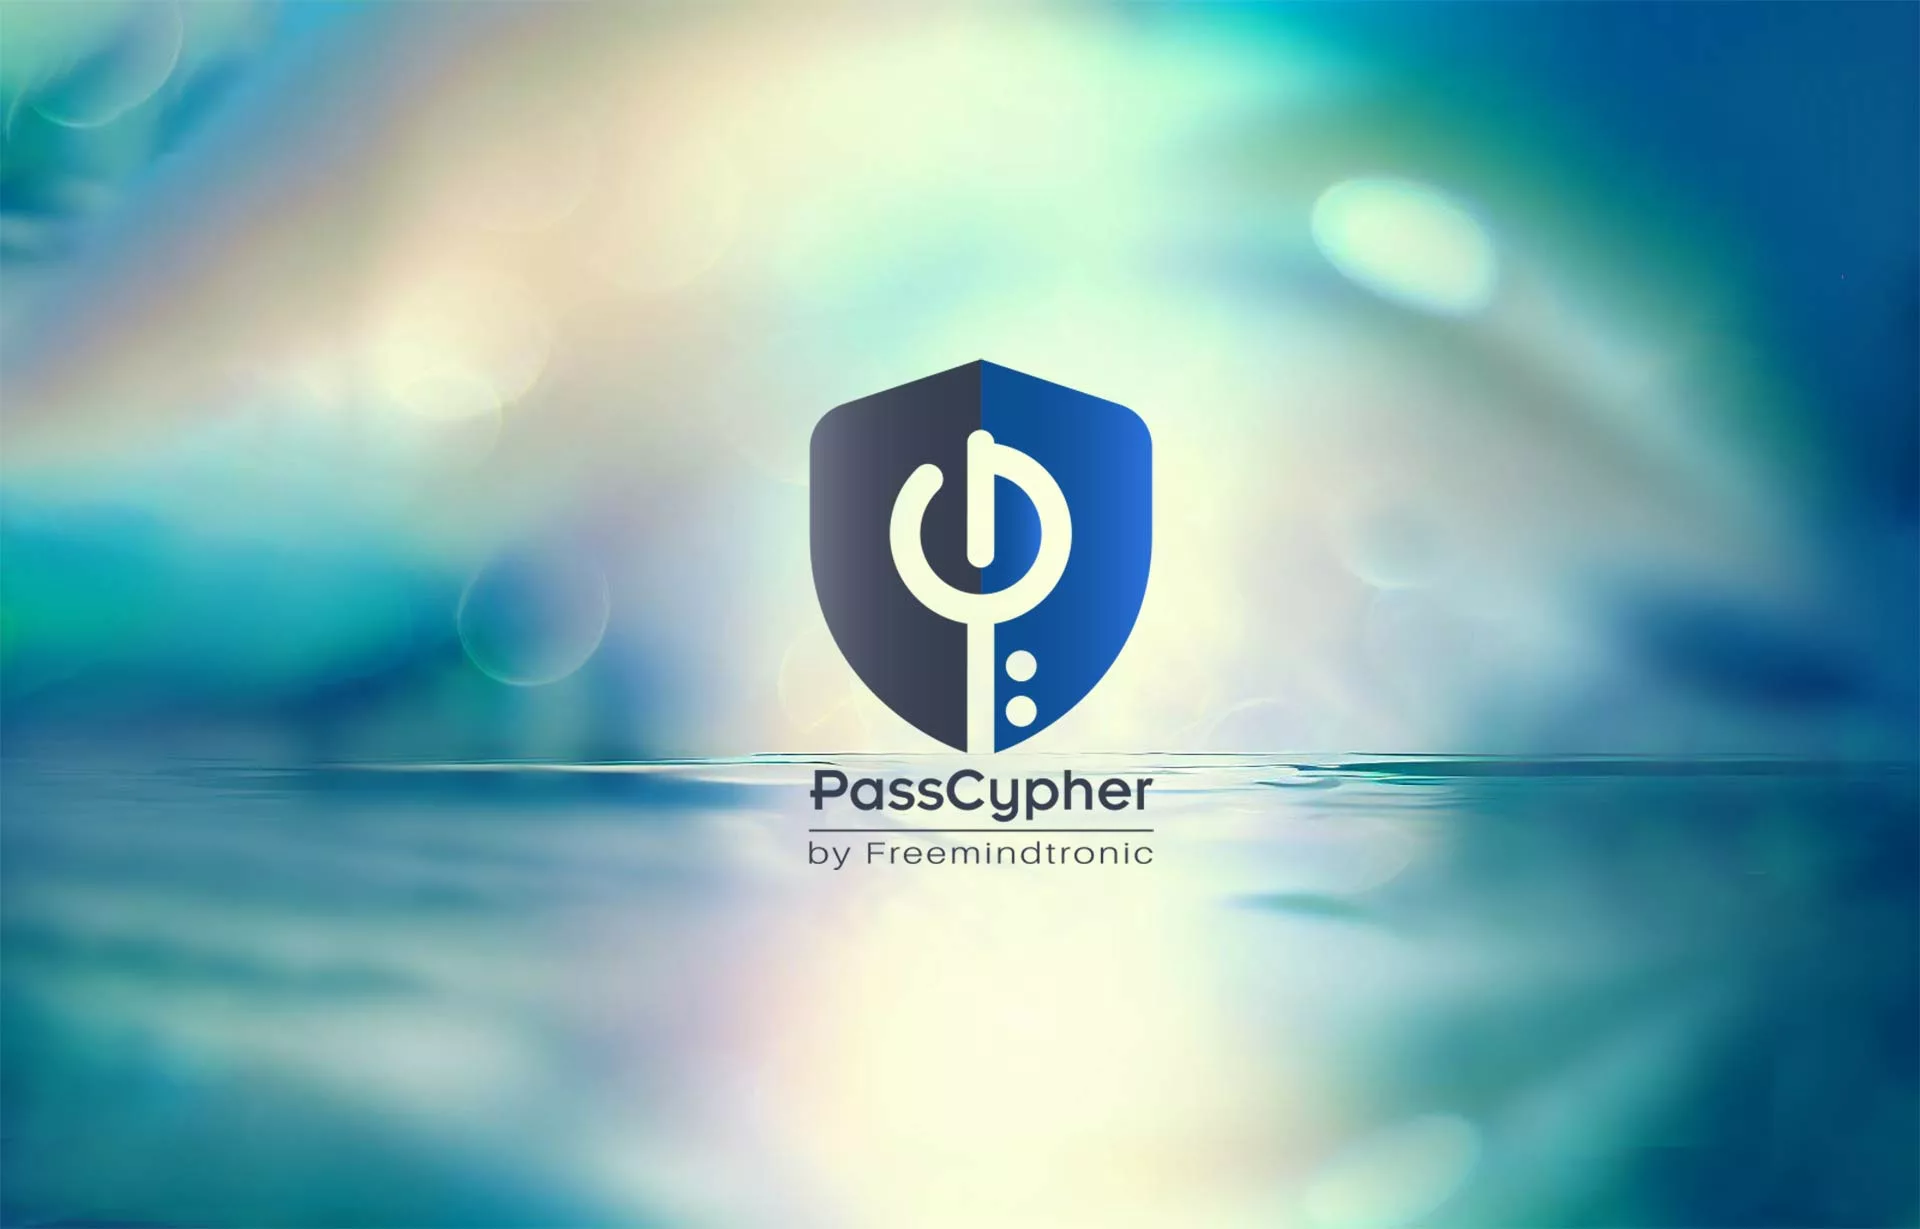 PassCypher HSM password manager logo by Freemindtronic, floating above serene water.